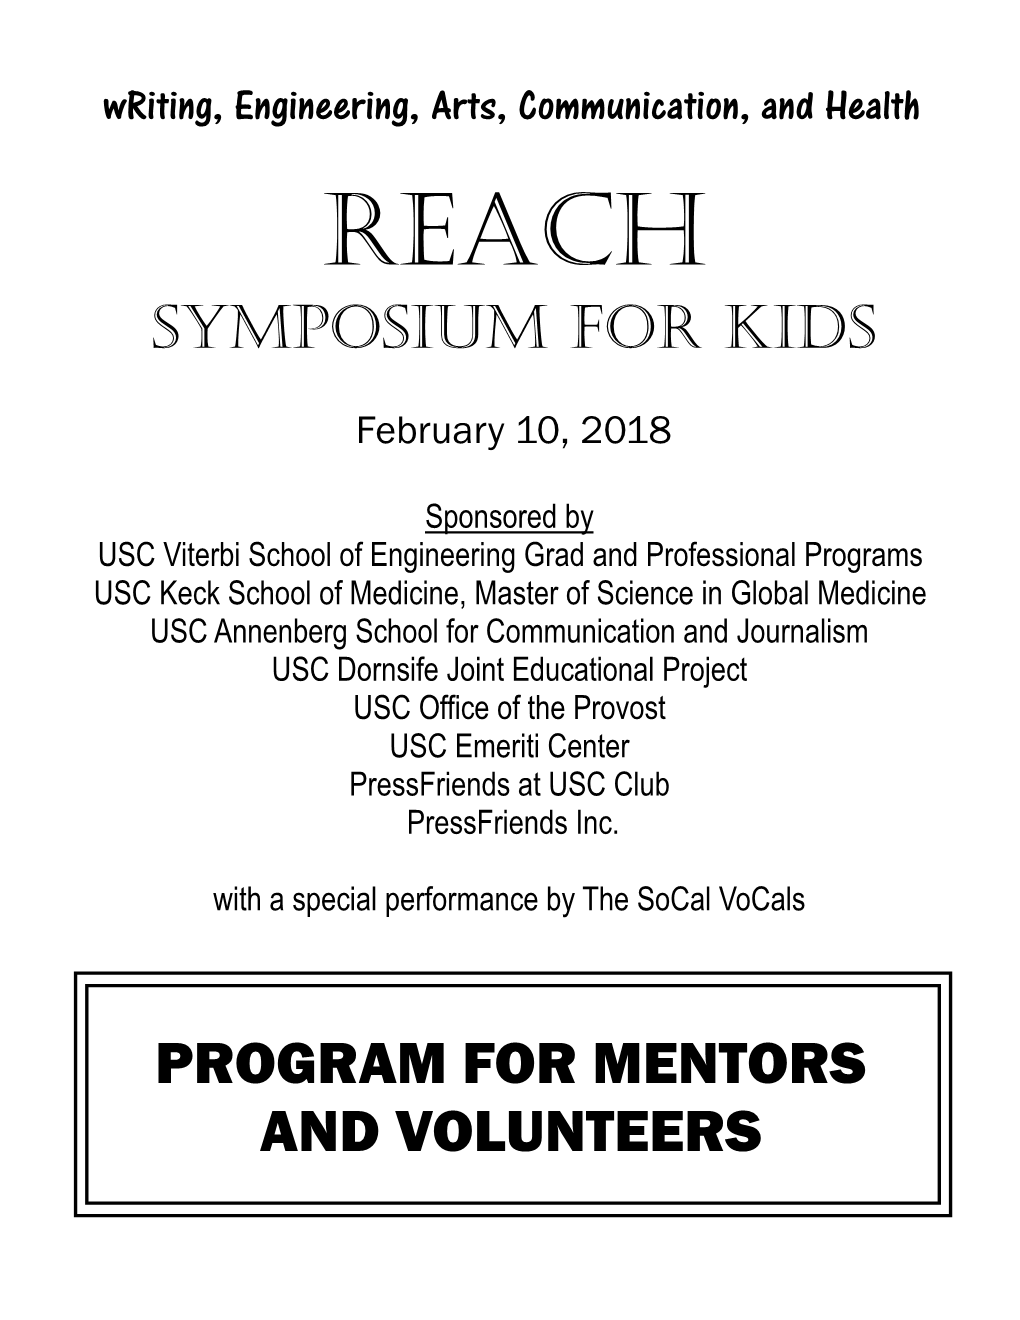 Symposium for Kids PROGRAM for MENTORS and VOLUNTEERS